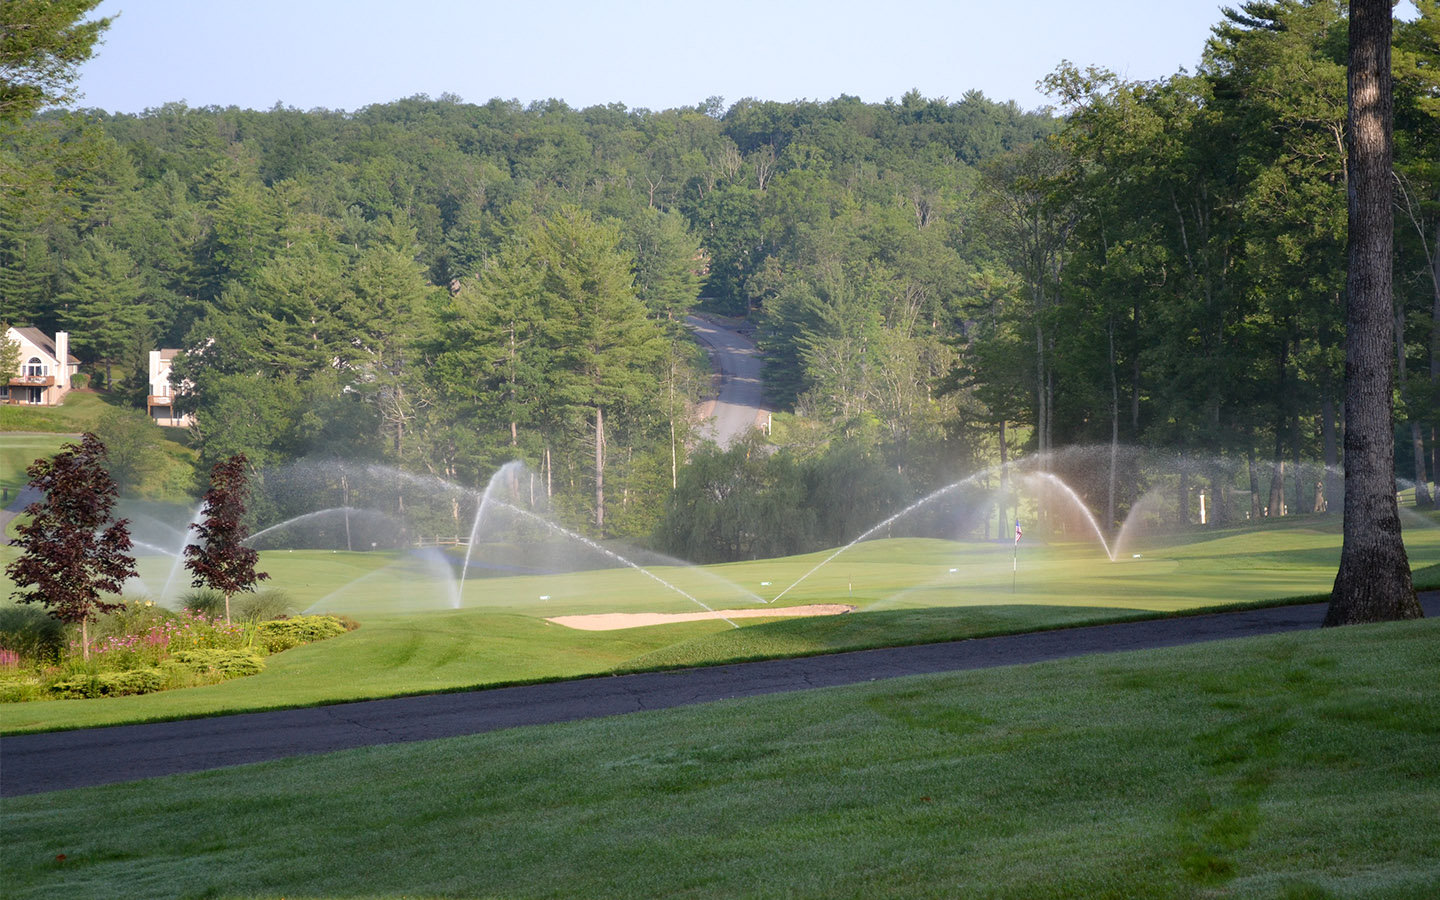 Sprinklers spraying on golf course.